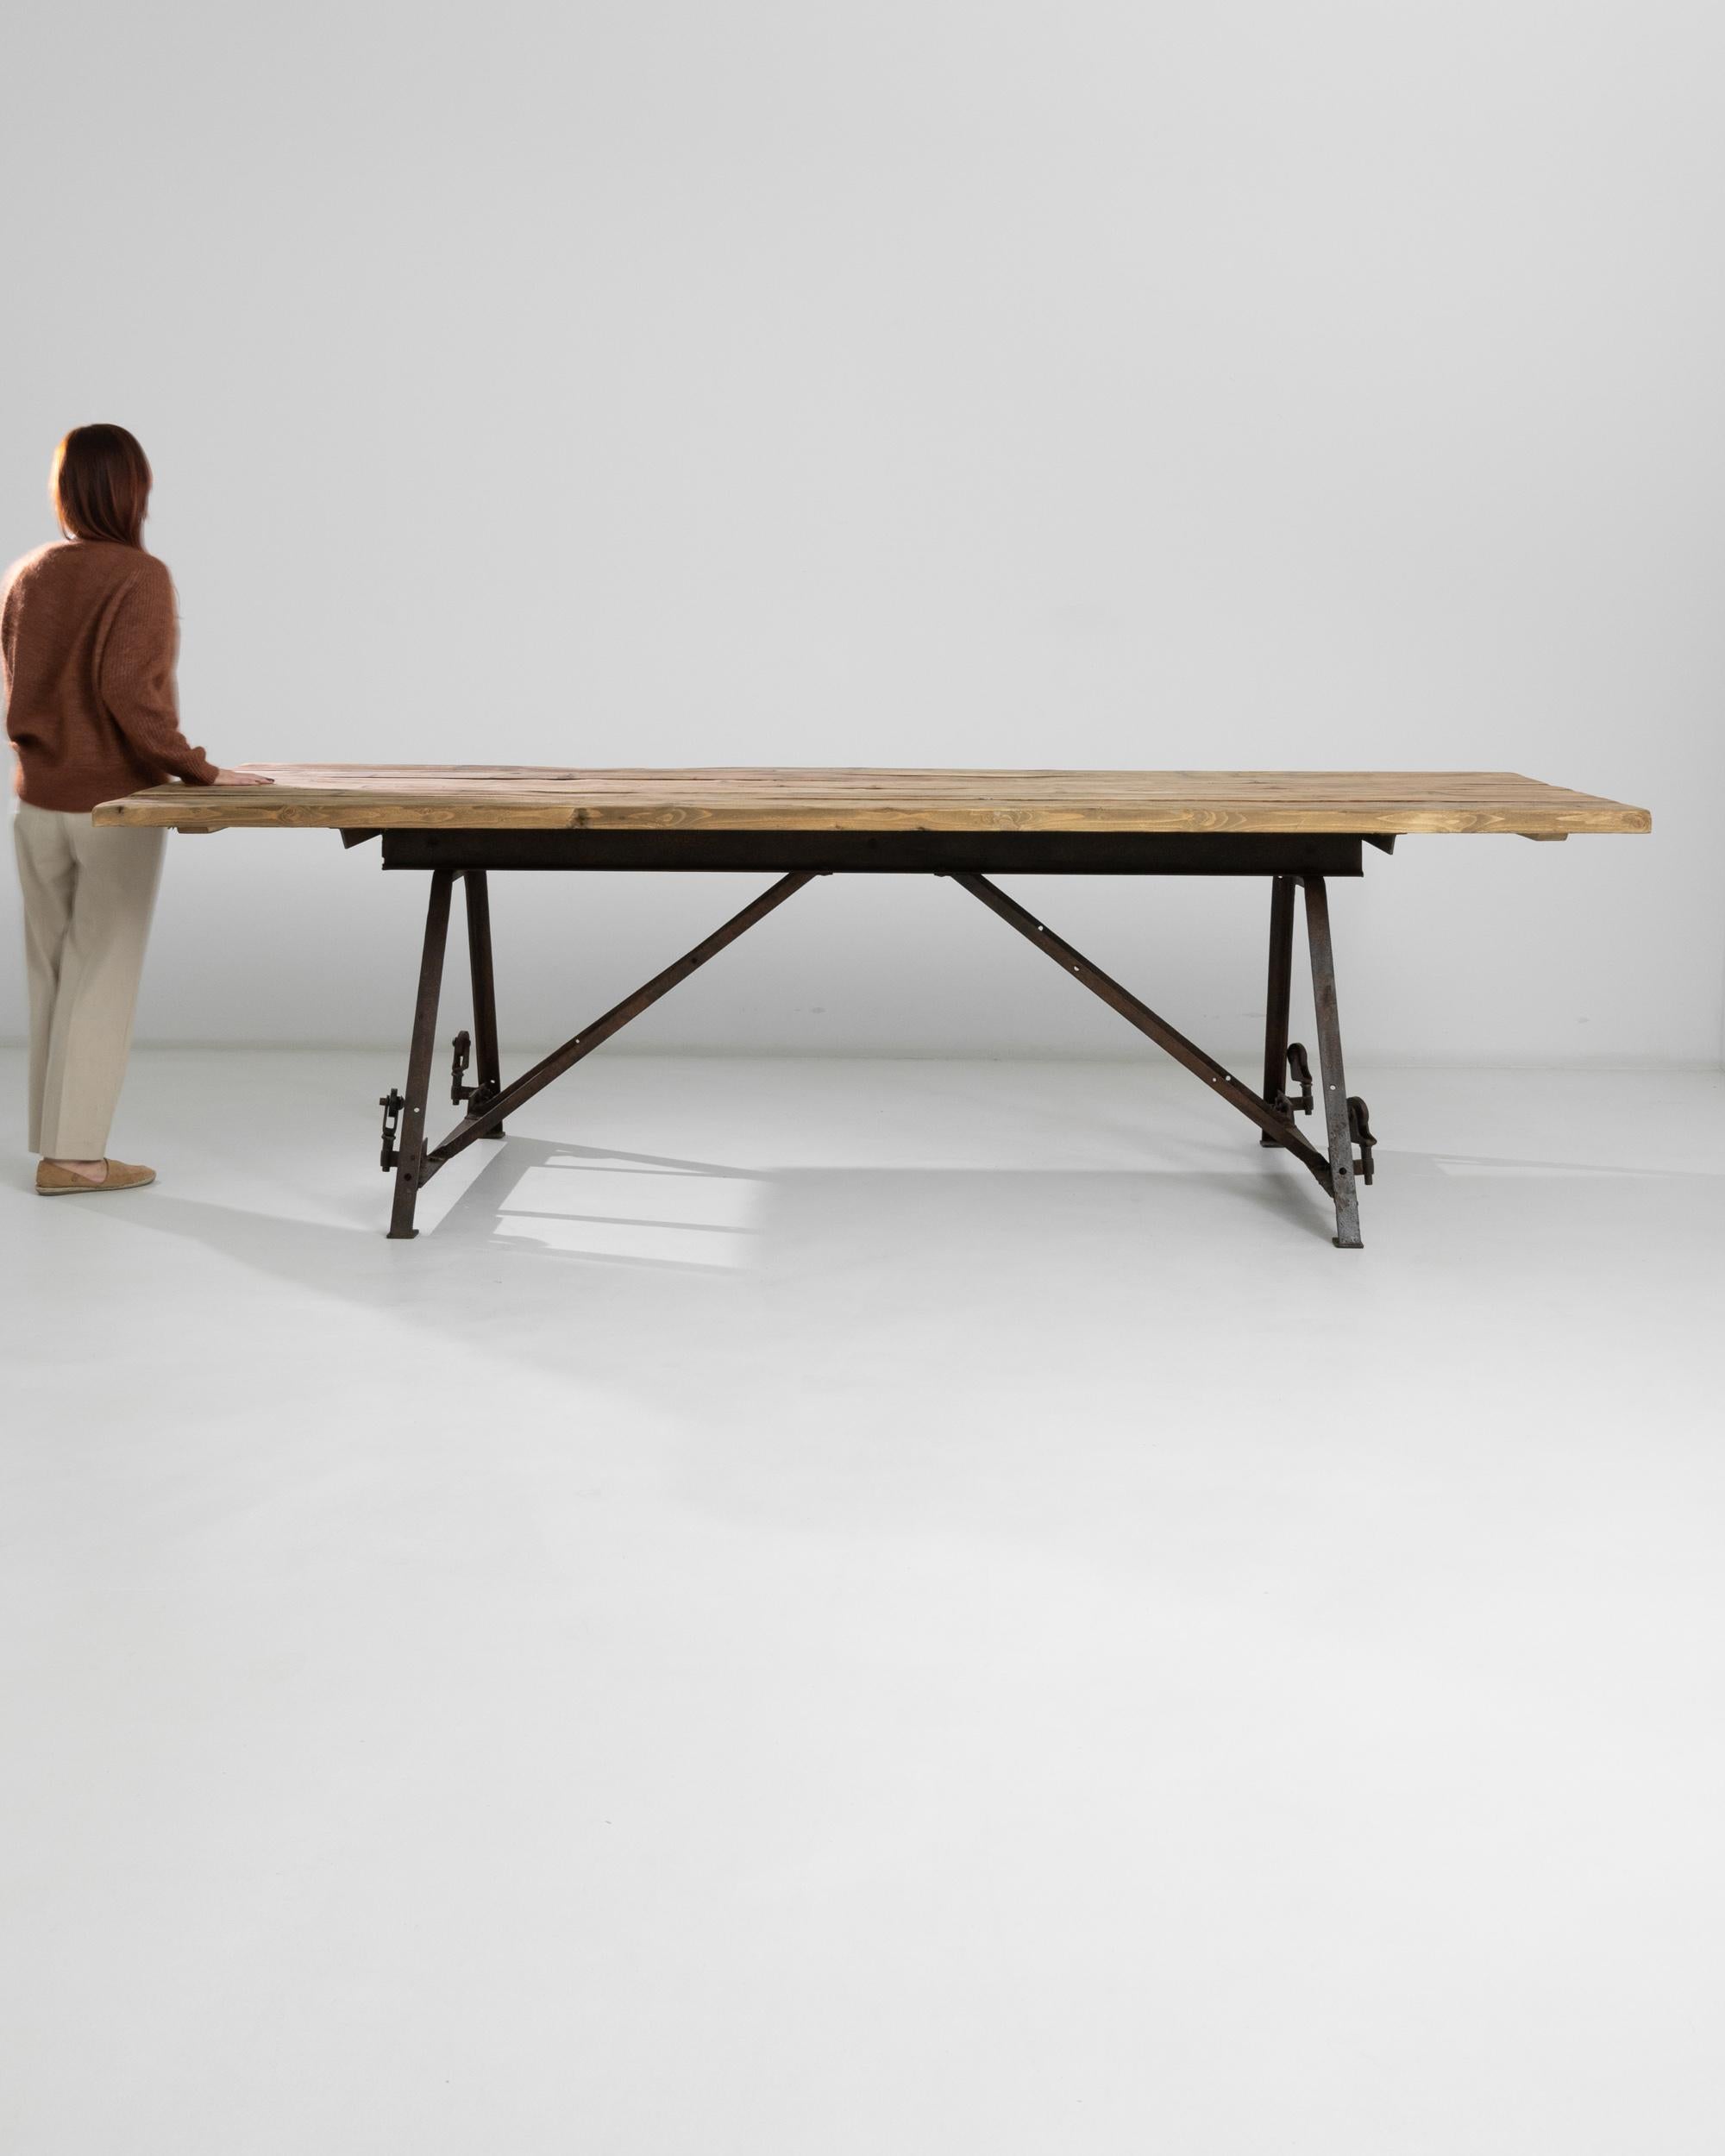 A heavy duty French wooden and metal table from the twentieth century. This large table is constructed from sturdy wooden planks and steel angle rods, giving it an angular and wirey demeanor. Elegantly industrial, this unique table could seat a